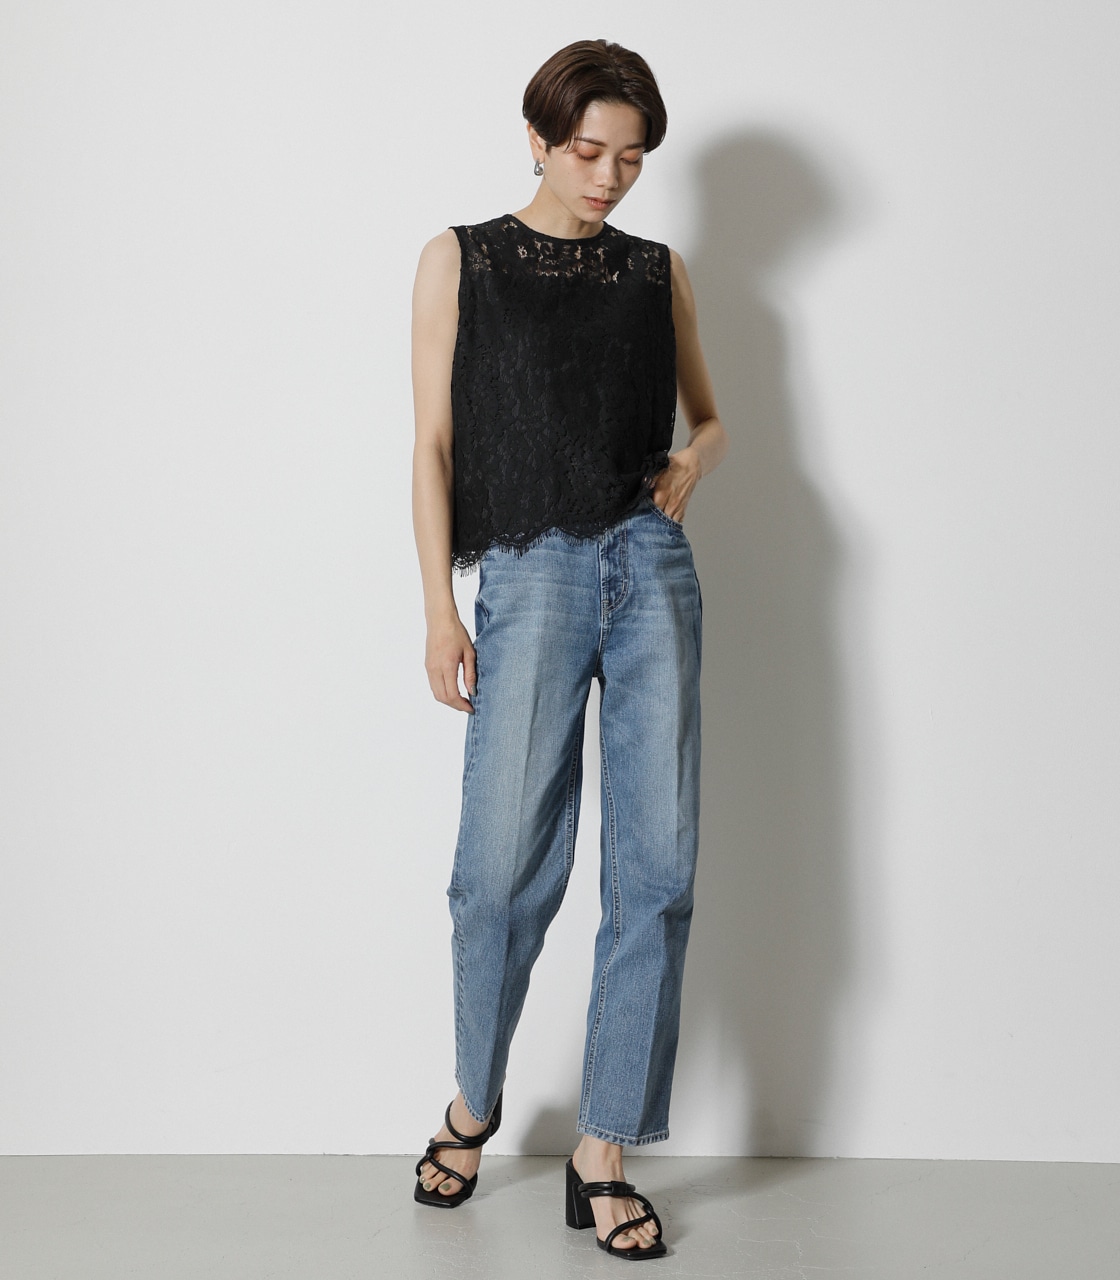 SCALLOP LACE TOPS/スカロップレーストップス 詳細画像 BLK 4